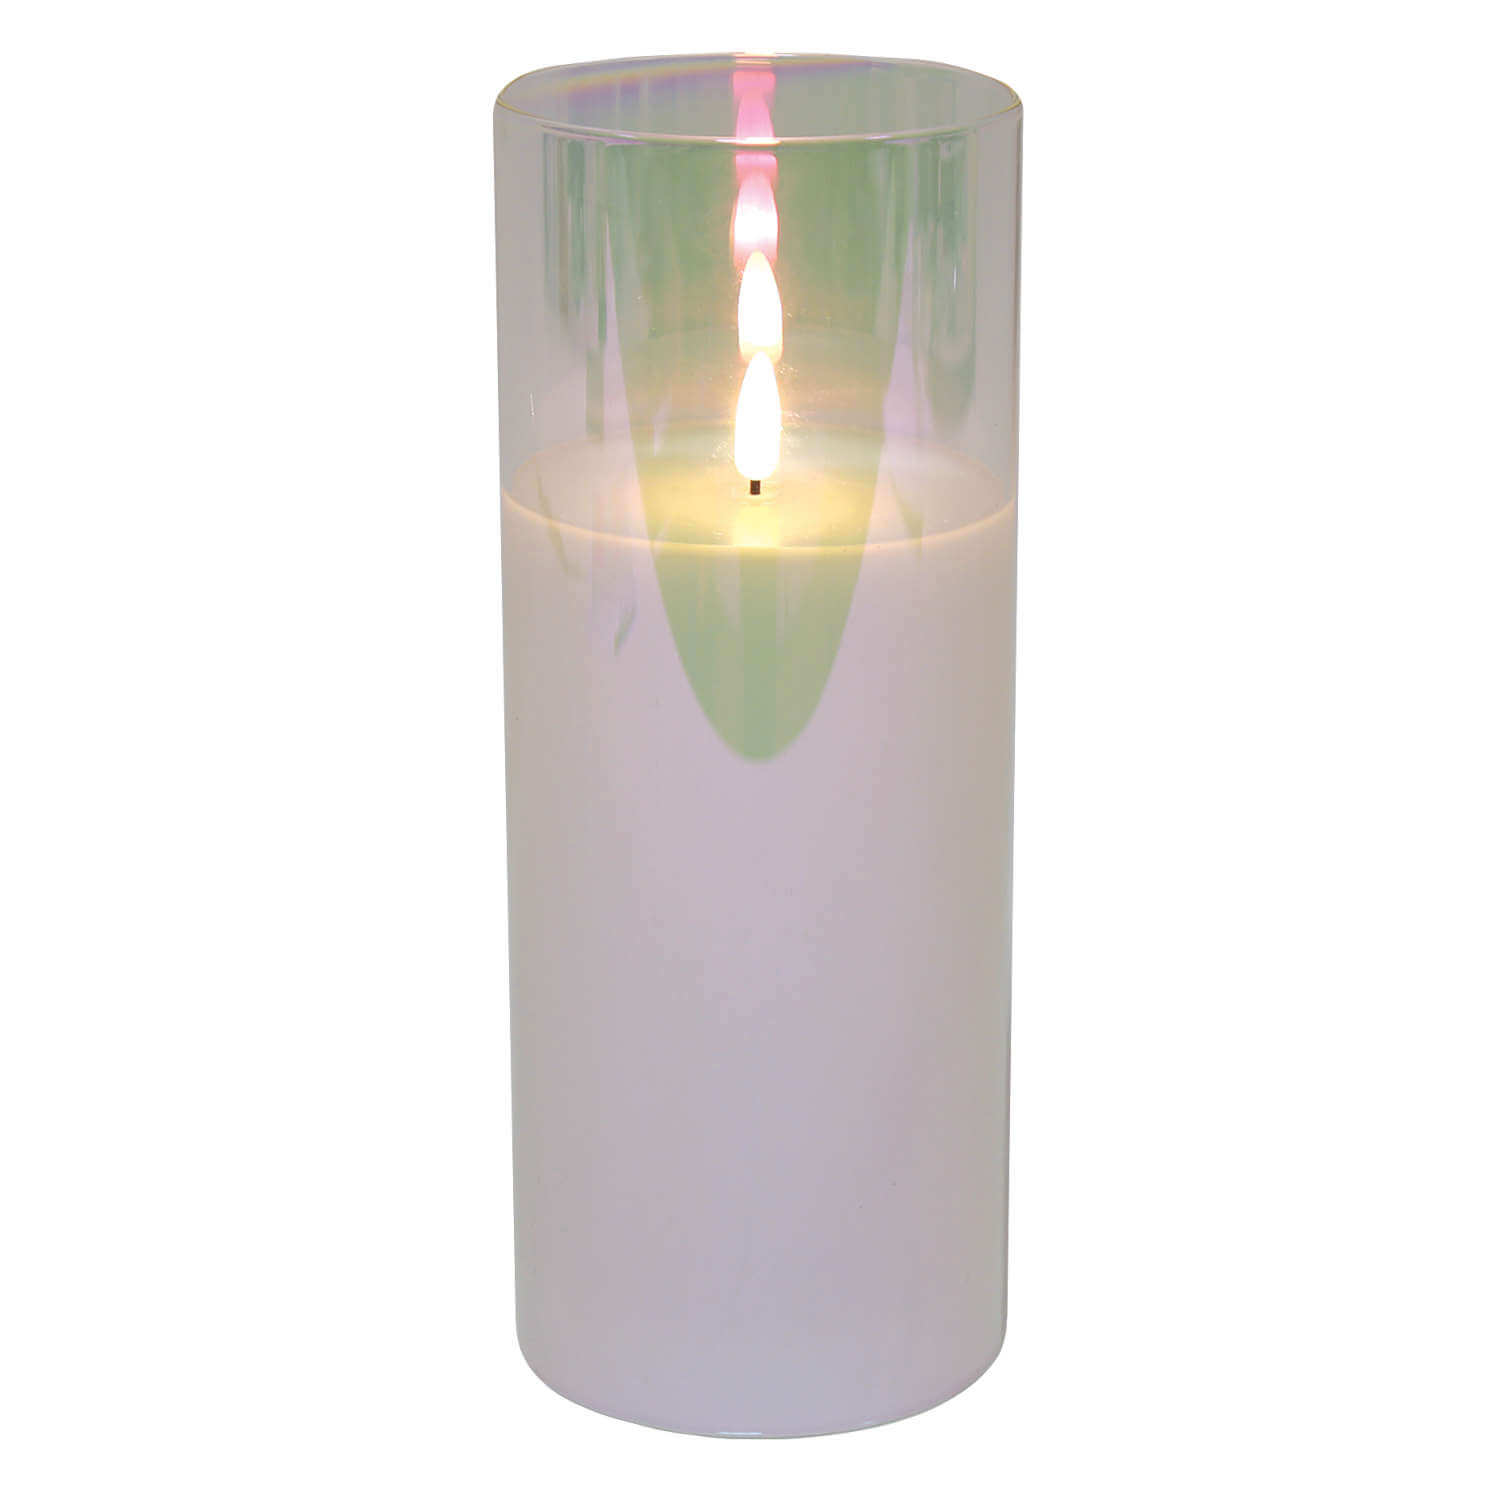 The Home Christmas LED Lustre Candle 10cm x 25cm 1 Shaws Department Stores